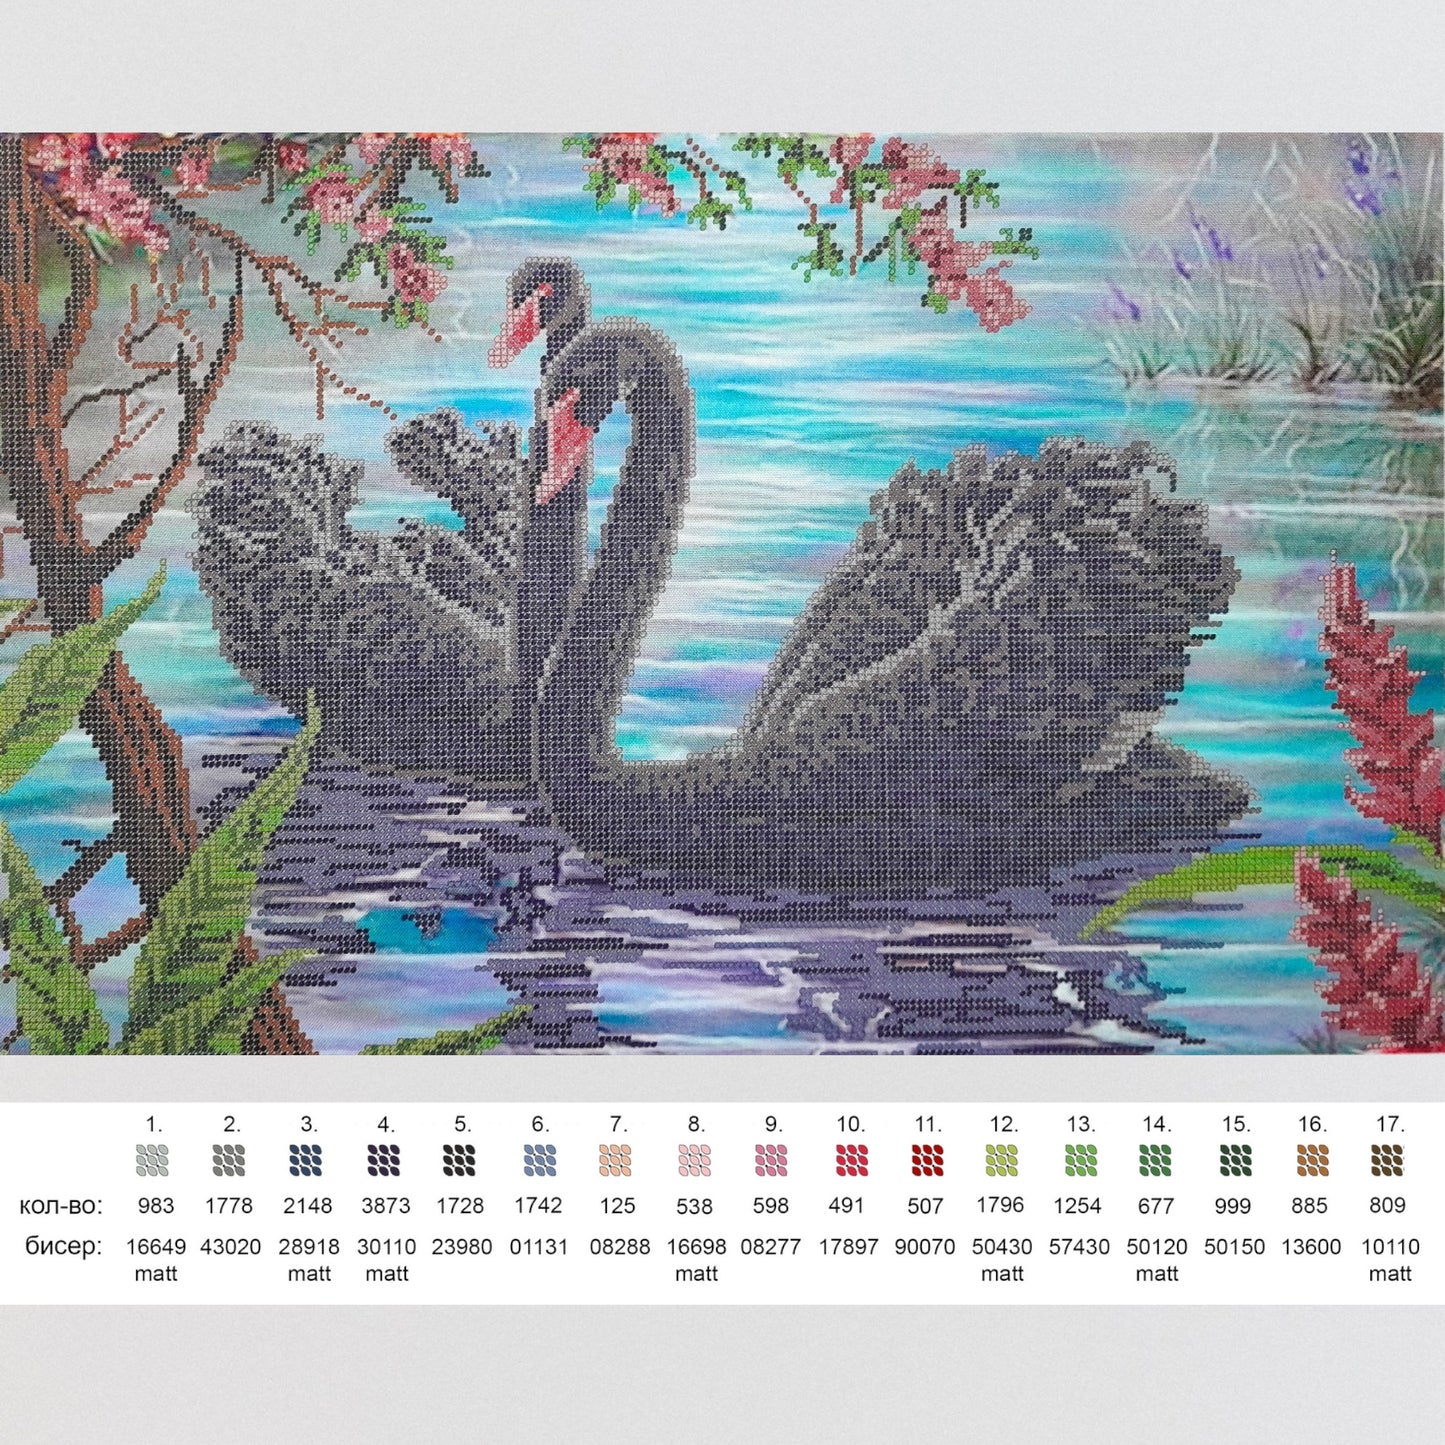 DIY Bead embroidery kit "Black Swans". Size: 18.5-15.7in (47-30сm) - VadymShop